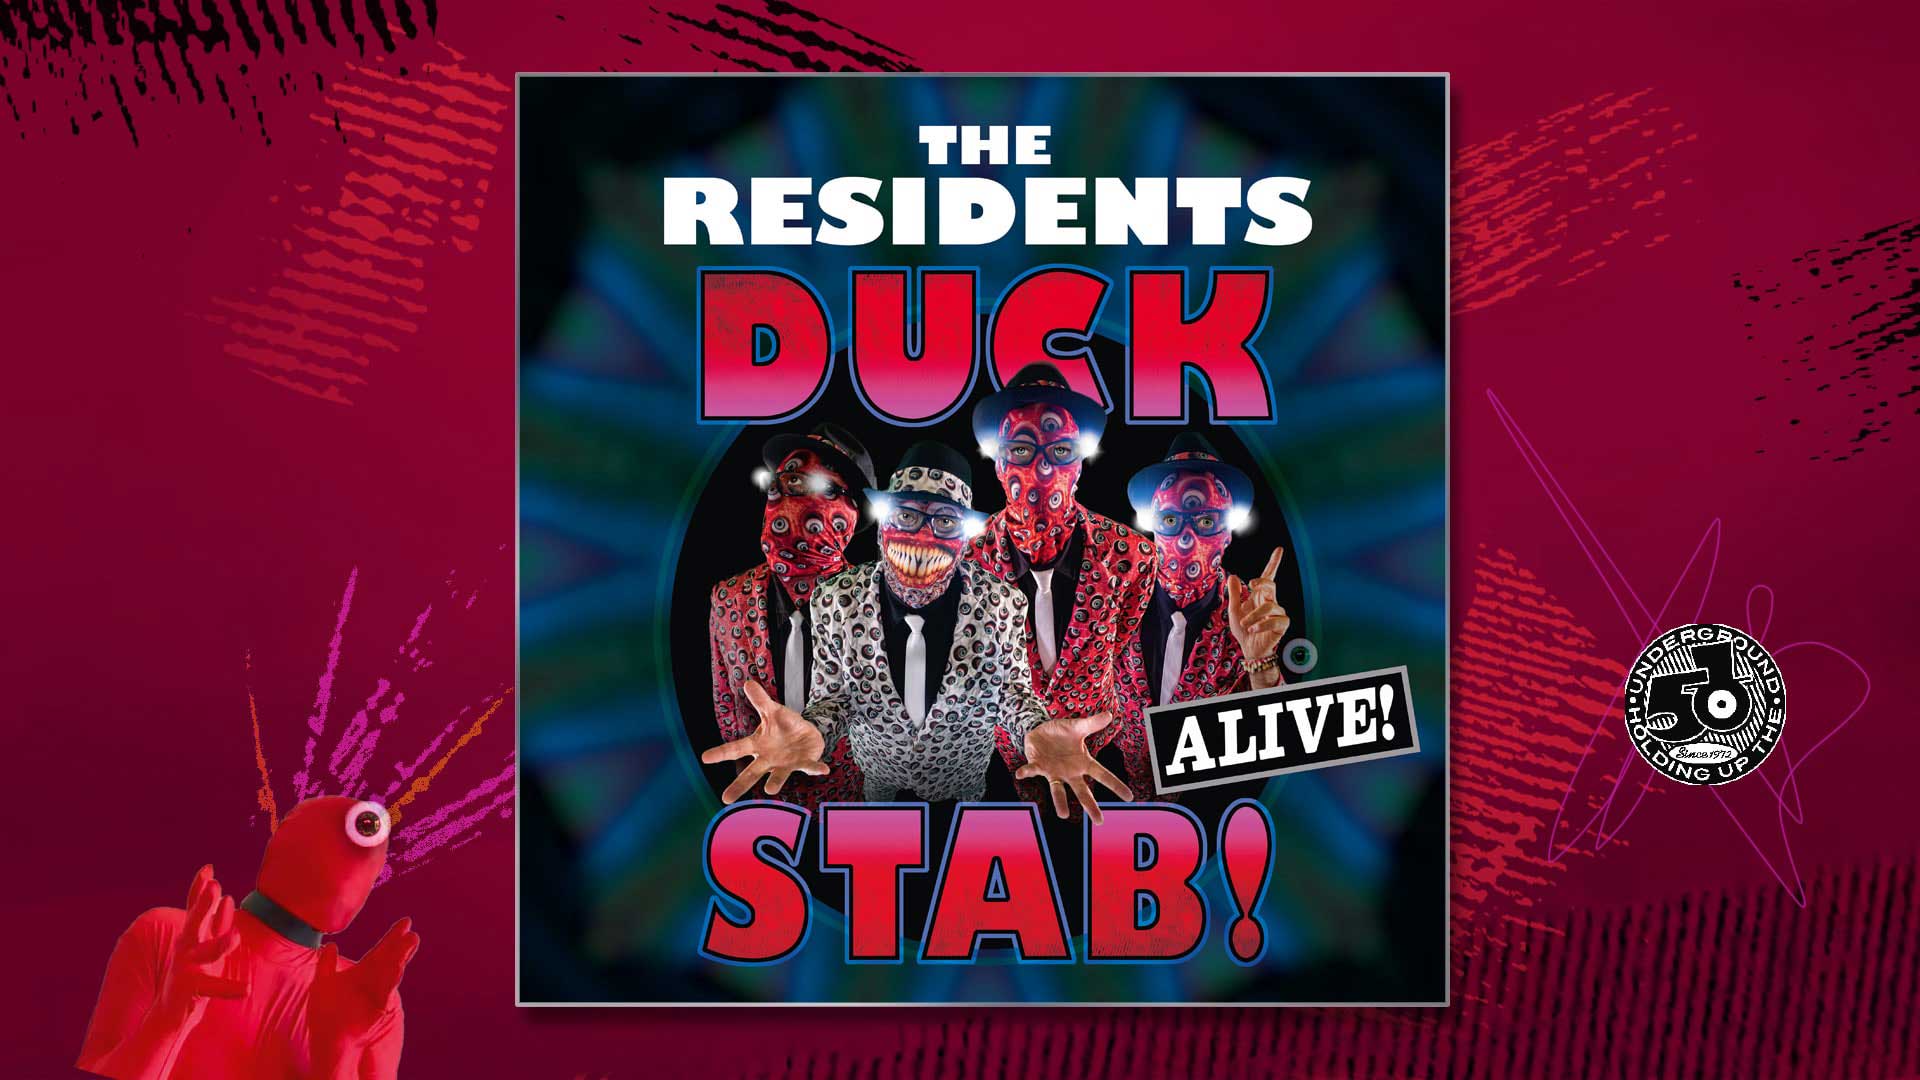 The Residents: Duck Stab Alive